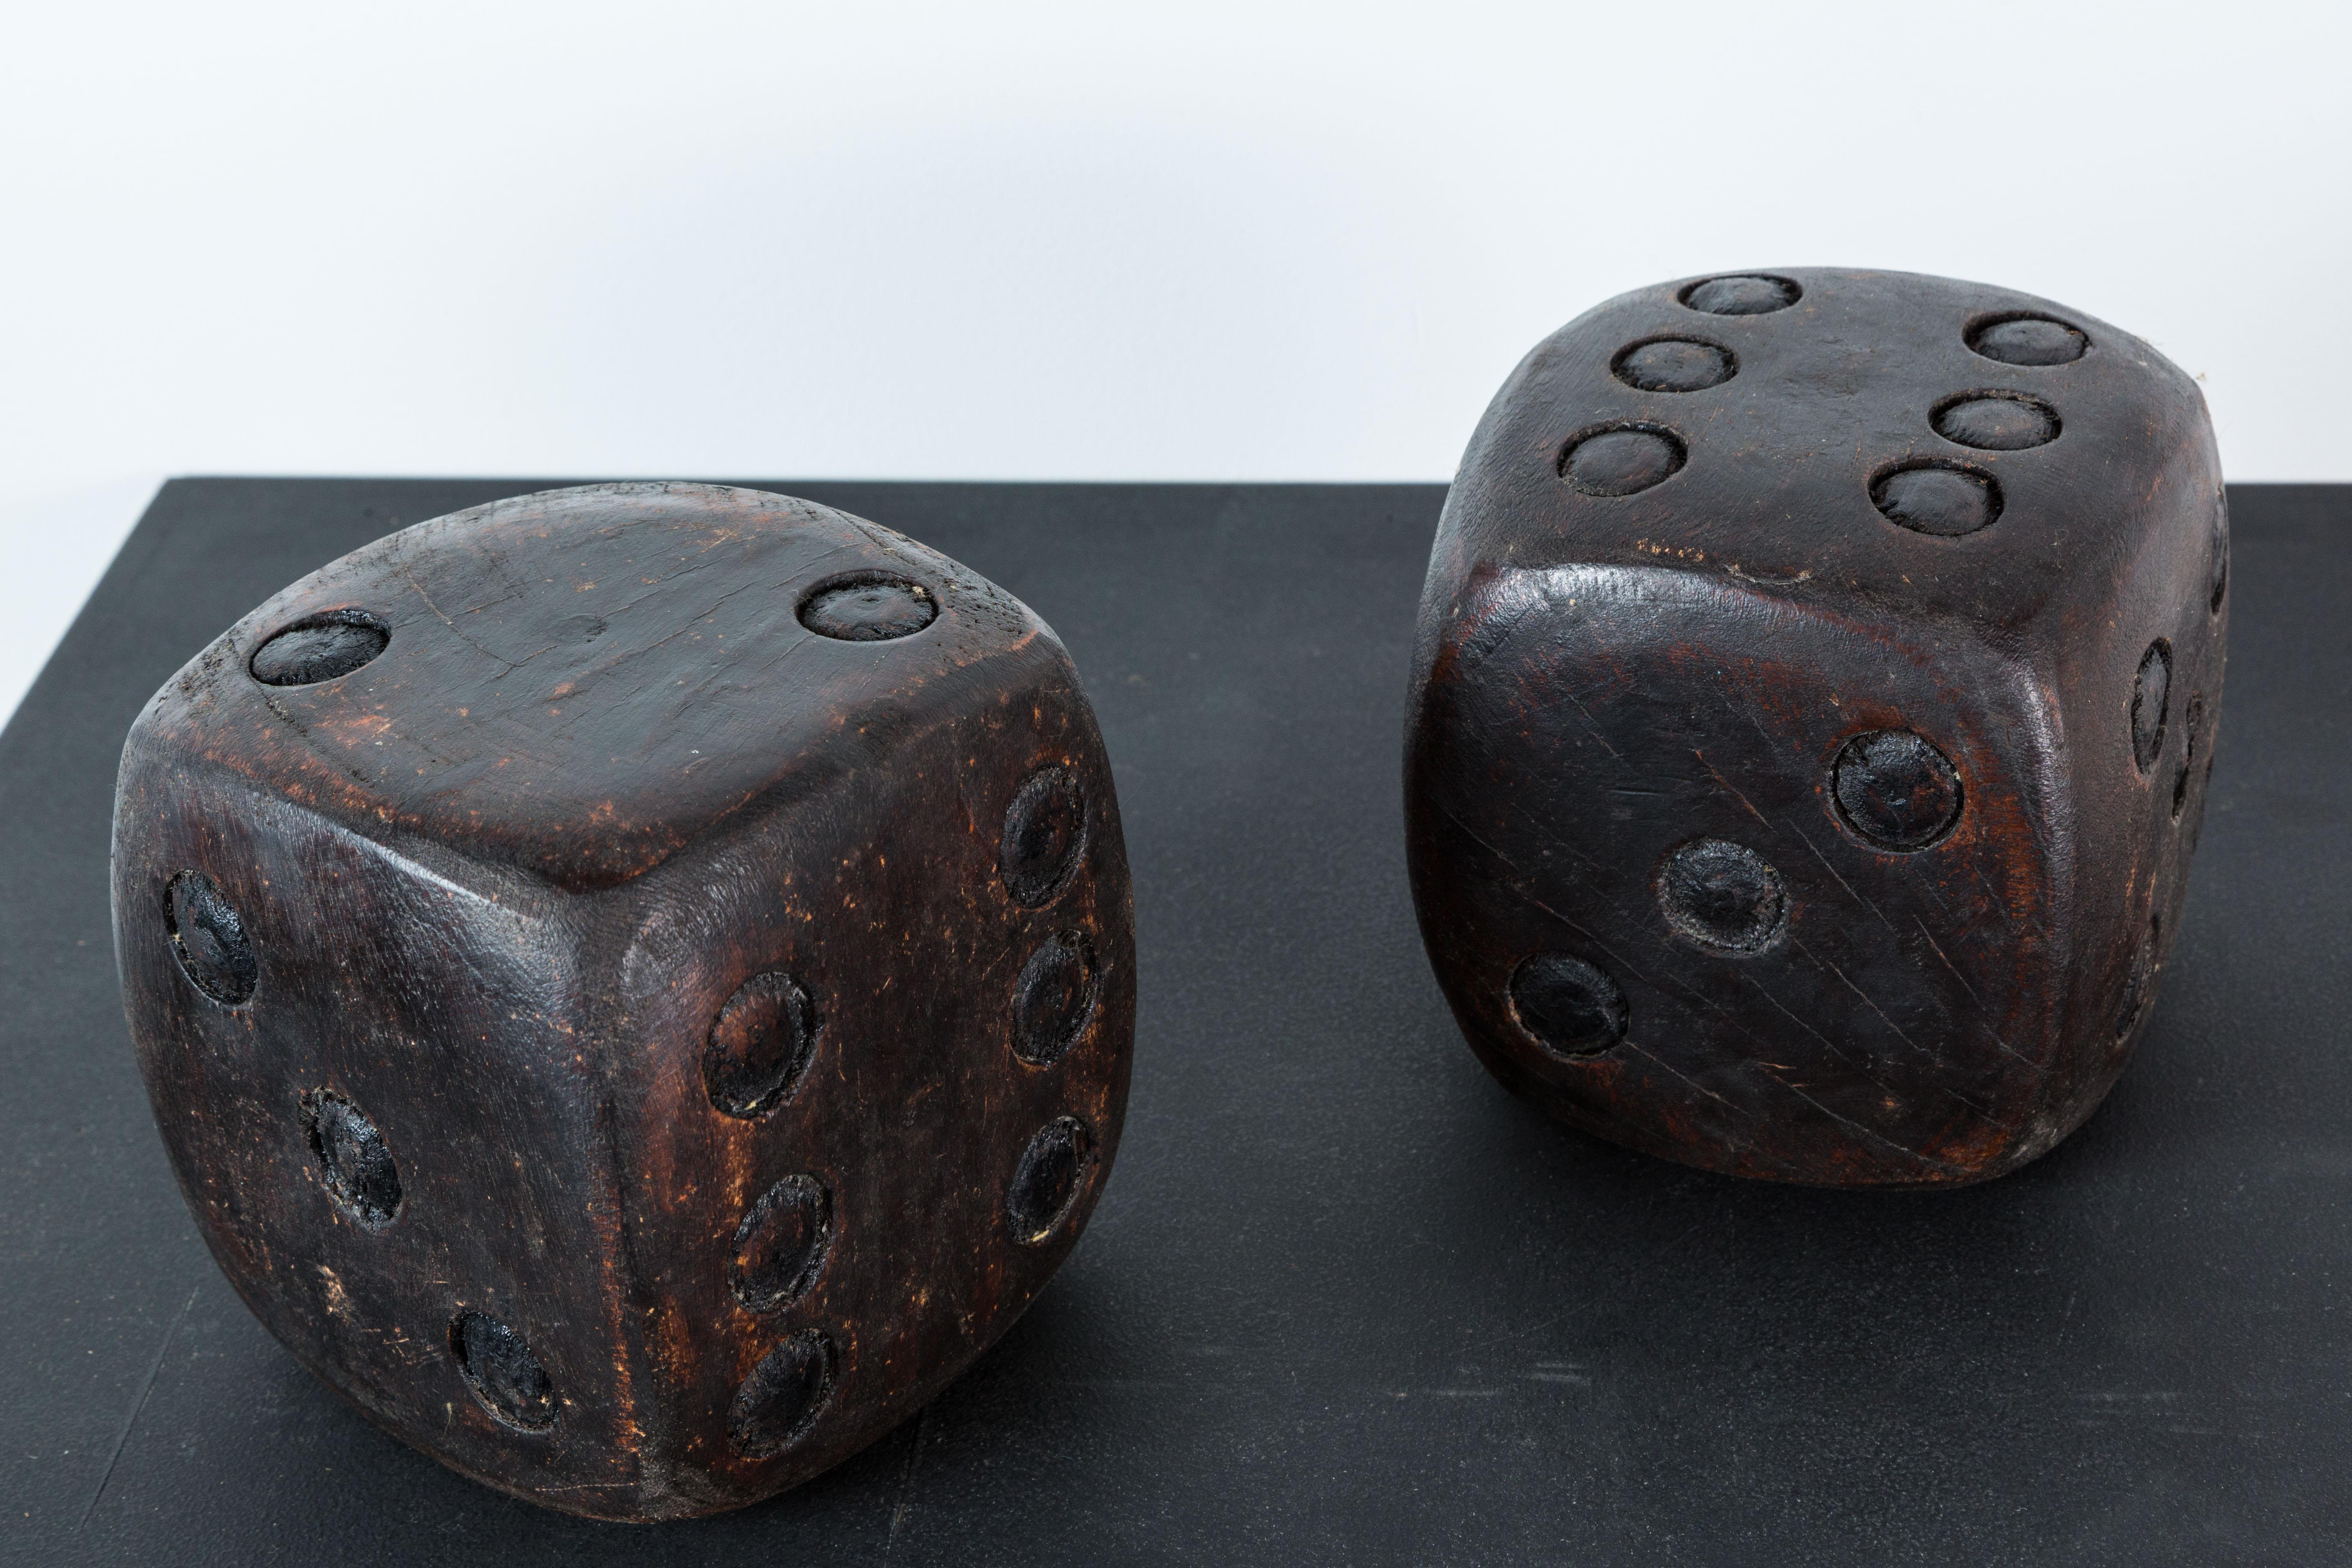 Pair of nicely carved Folk Art dice. Quite heavy and solid. Original stained surface.